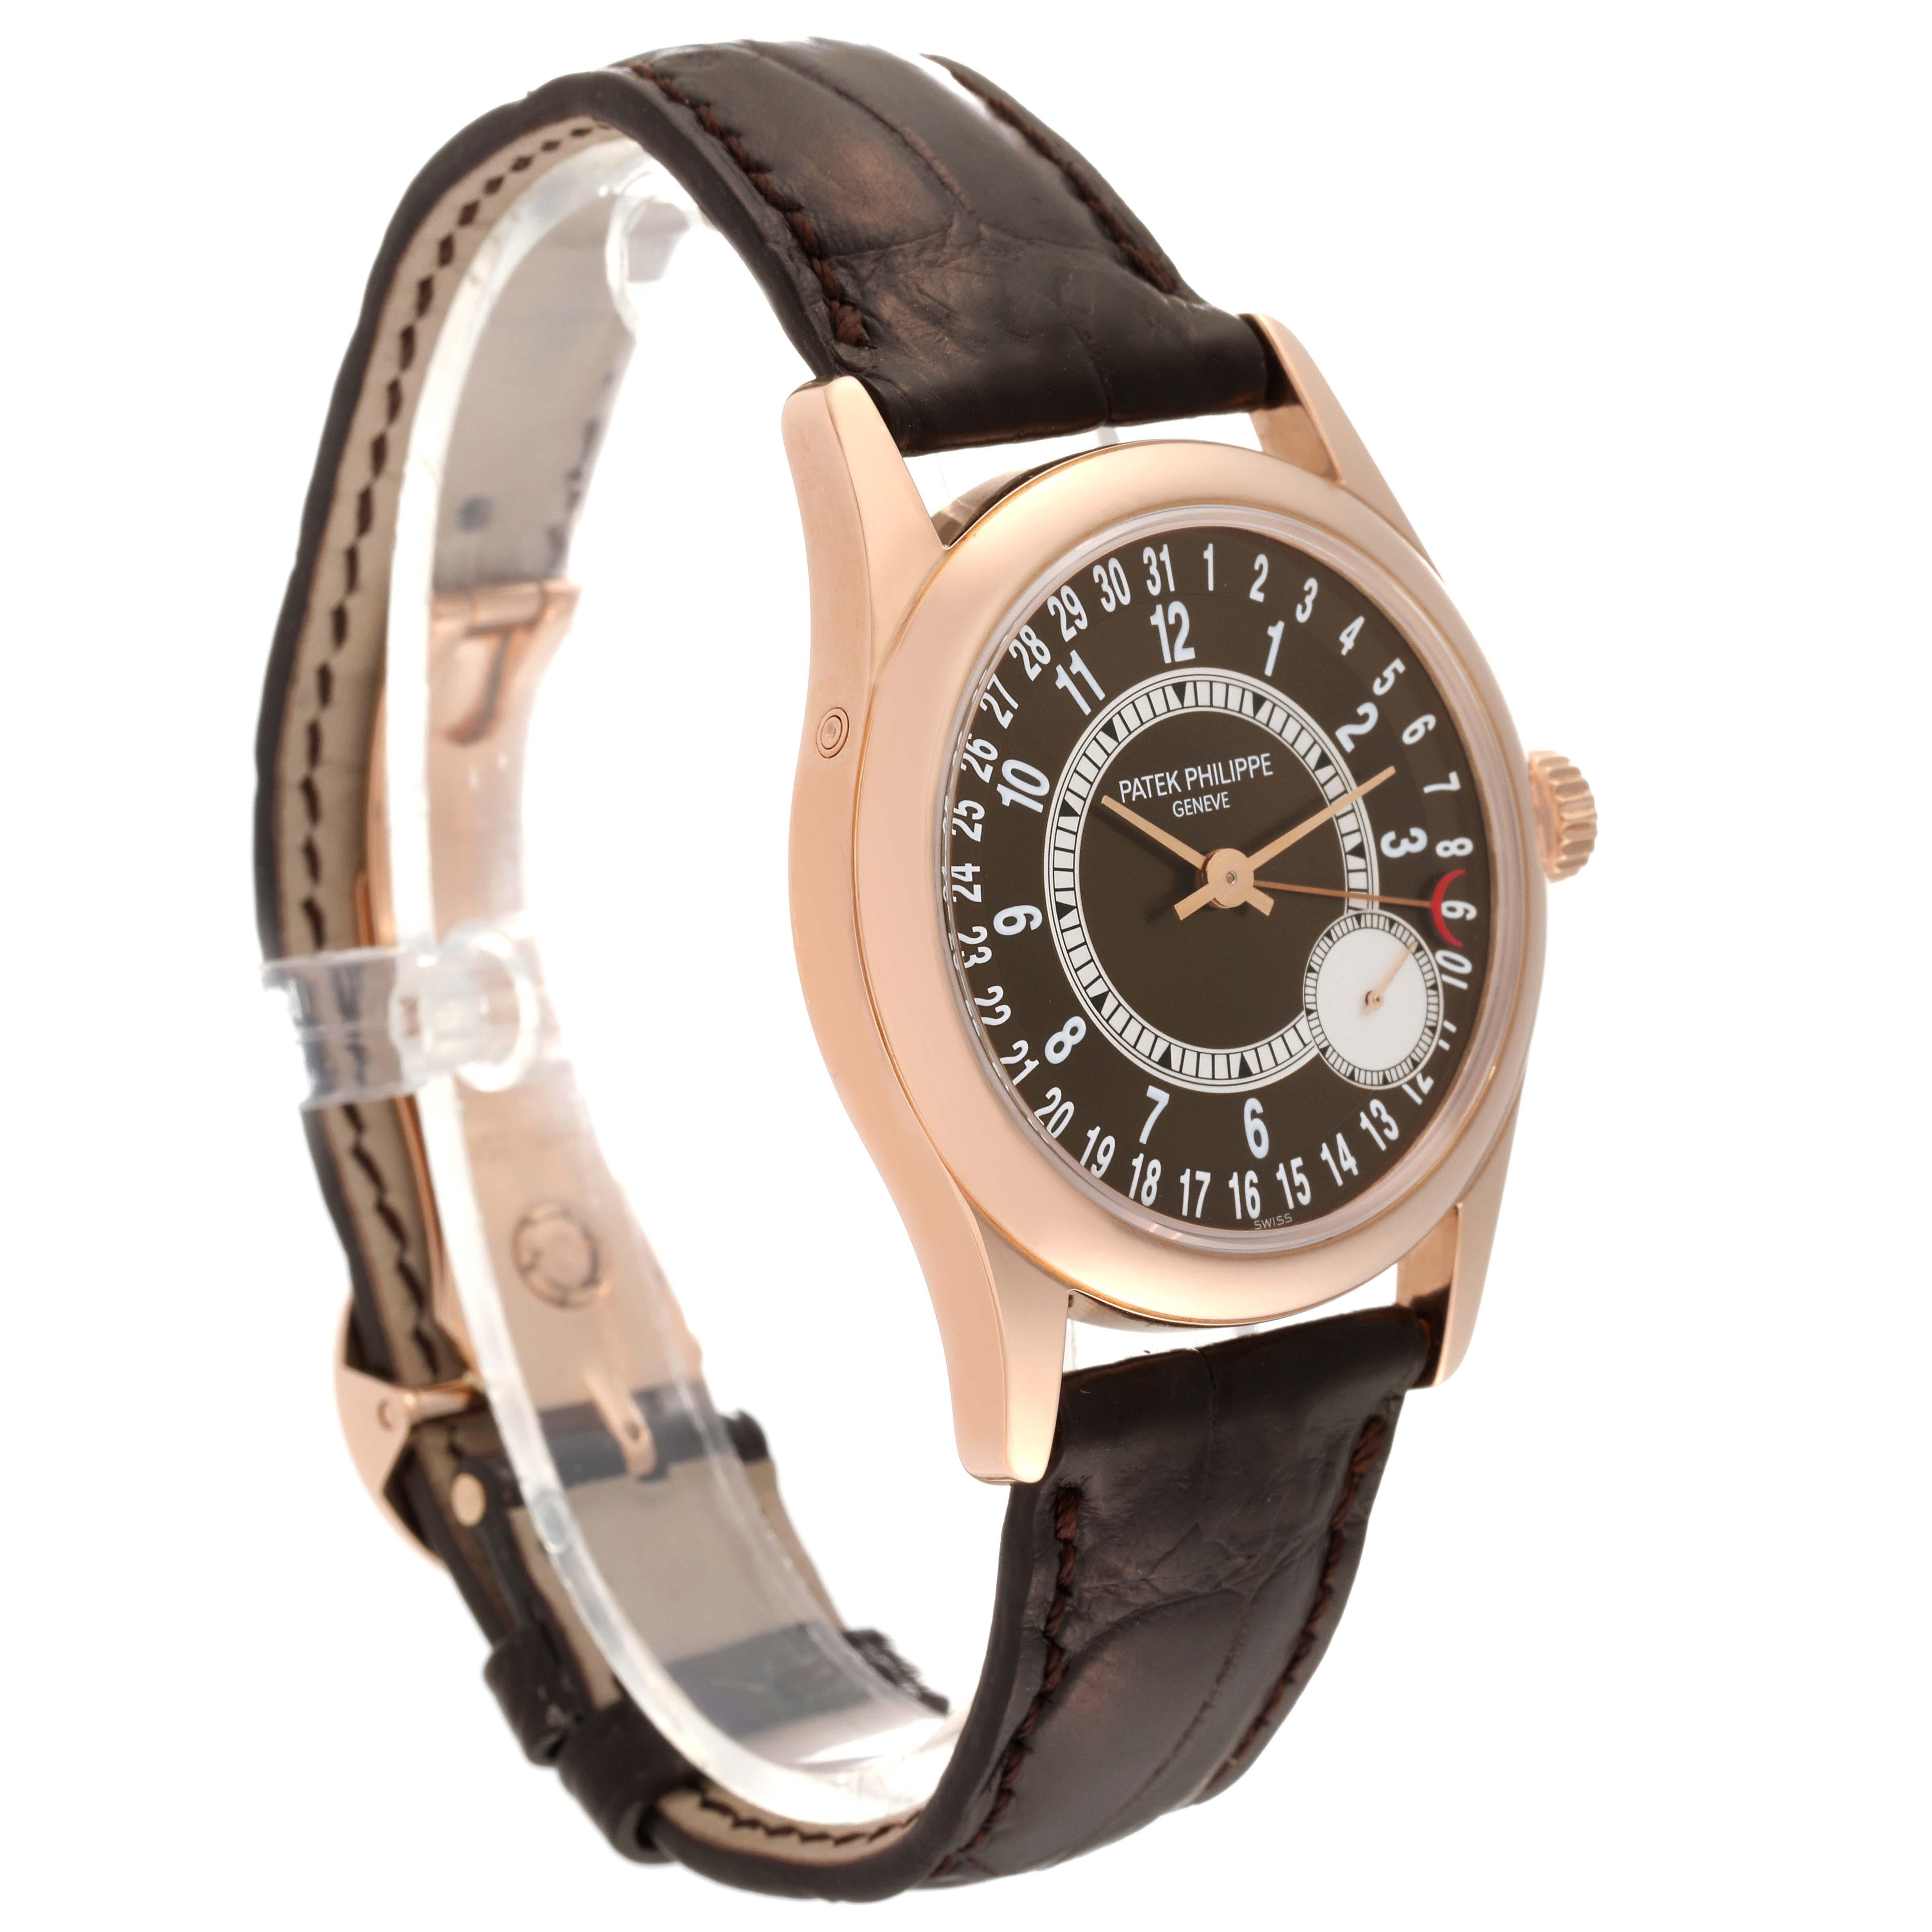 Patek Philippe Calatrava Rose Gold Brown Dial Mens Watch 6000R Box Papers. Automatic self-winding movement with gold micro-rotor, adjusted to heat, cold, isochronism and 5 positions, Seal of Geneva. 18k rose gold case 37.0 mm in diameter.